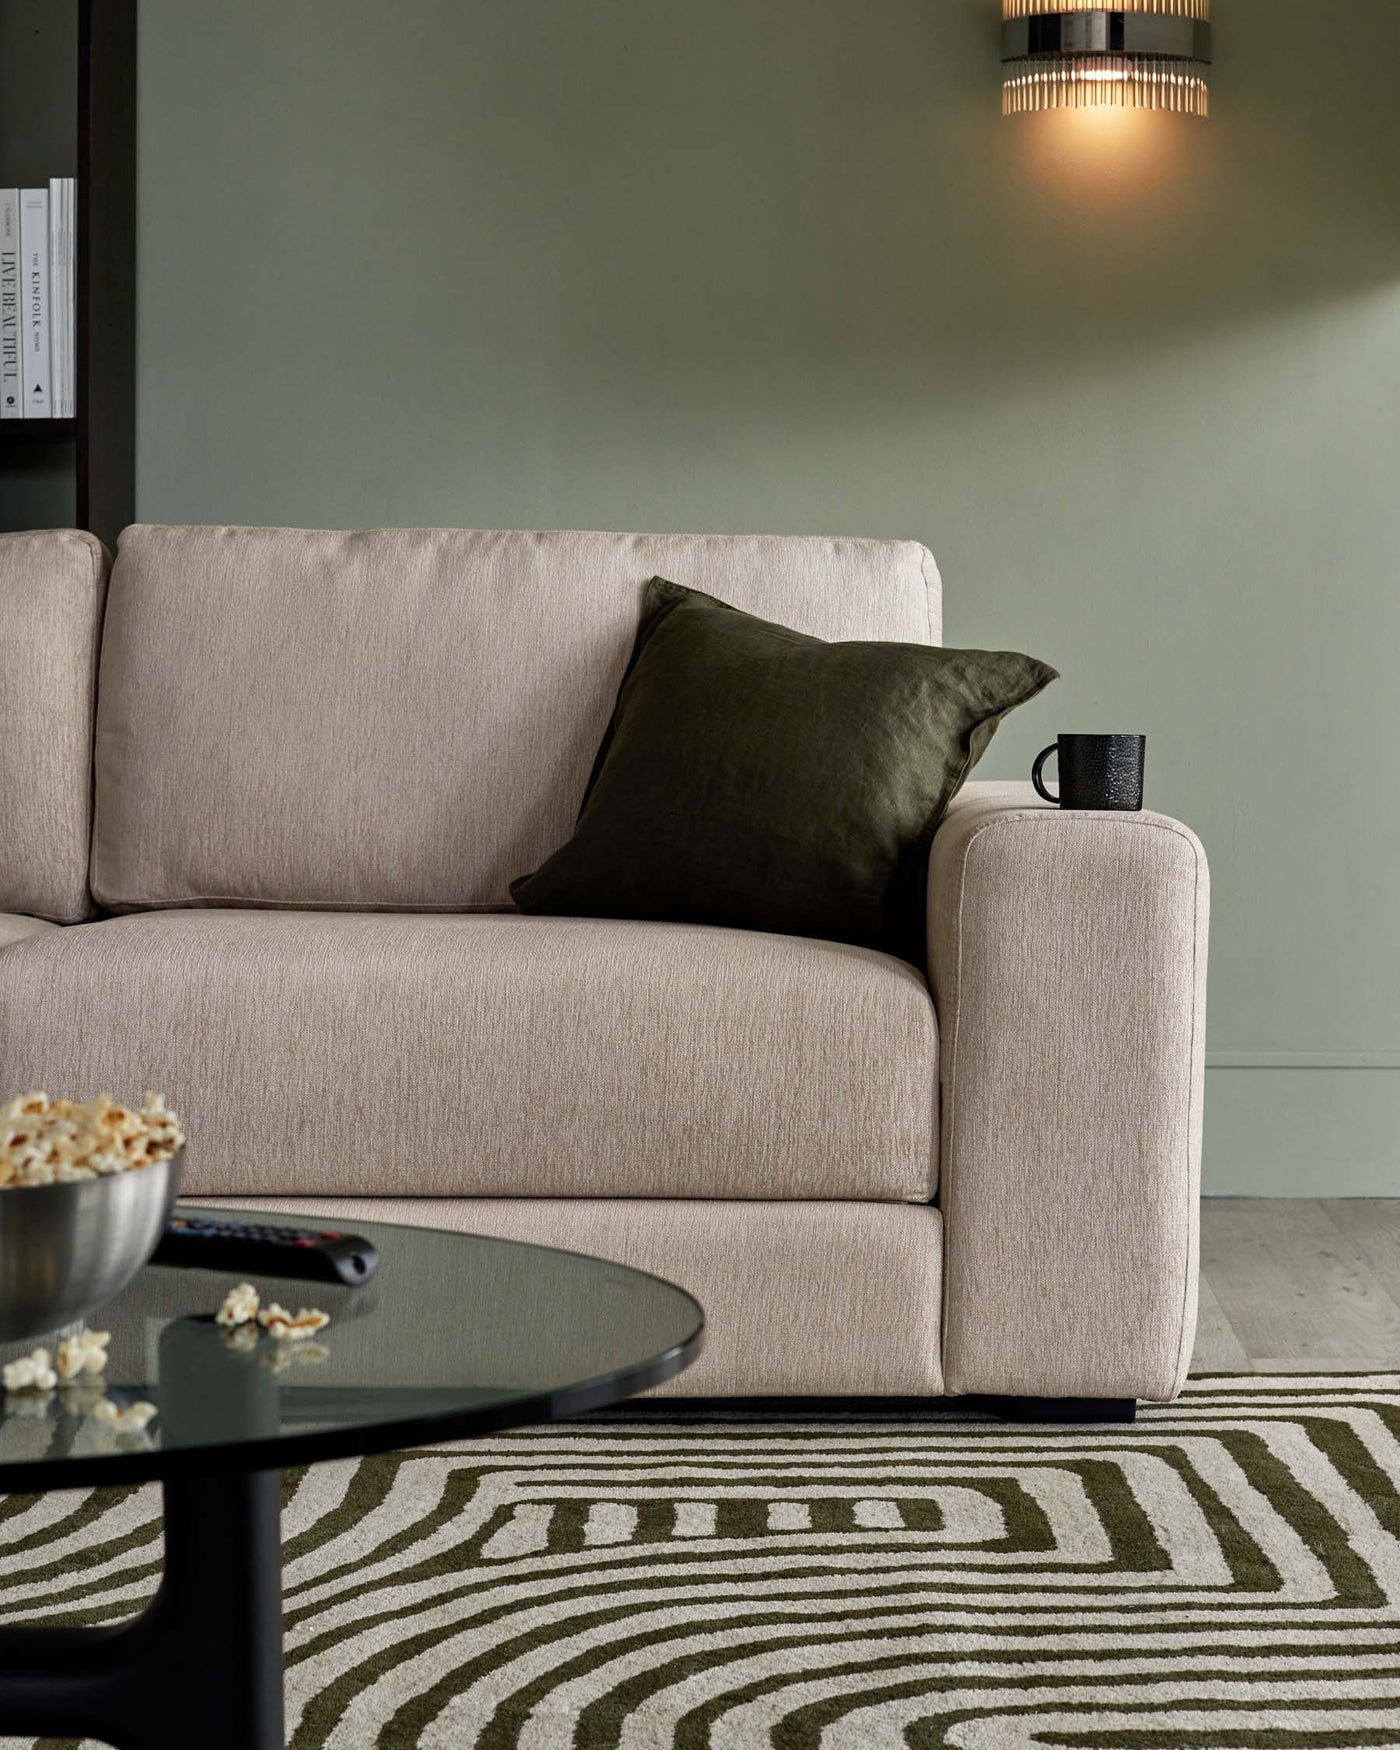 A contemporary beige fabric sofa with a minimalist design and clean lines, featuring plush seat cushions and a simple square armrest on the right. The sofa is accessorized with a single dark green throw pillow and has a round black side table with a mug on top, adjacent to it. In the foreground, a black circular coffee table holding a bowl of popcorn and a remote control complements the setup, all arranged over a patterned grey area rug.